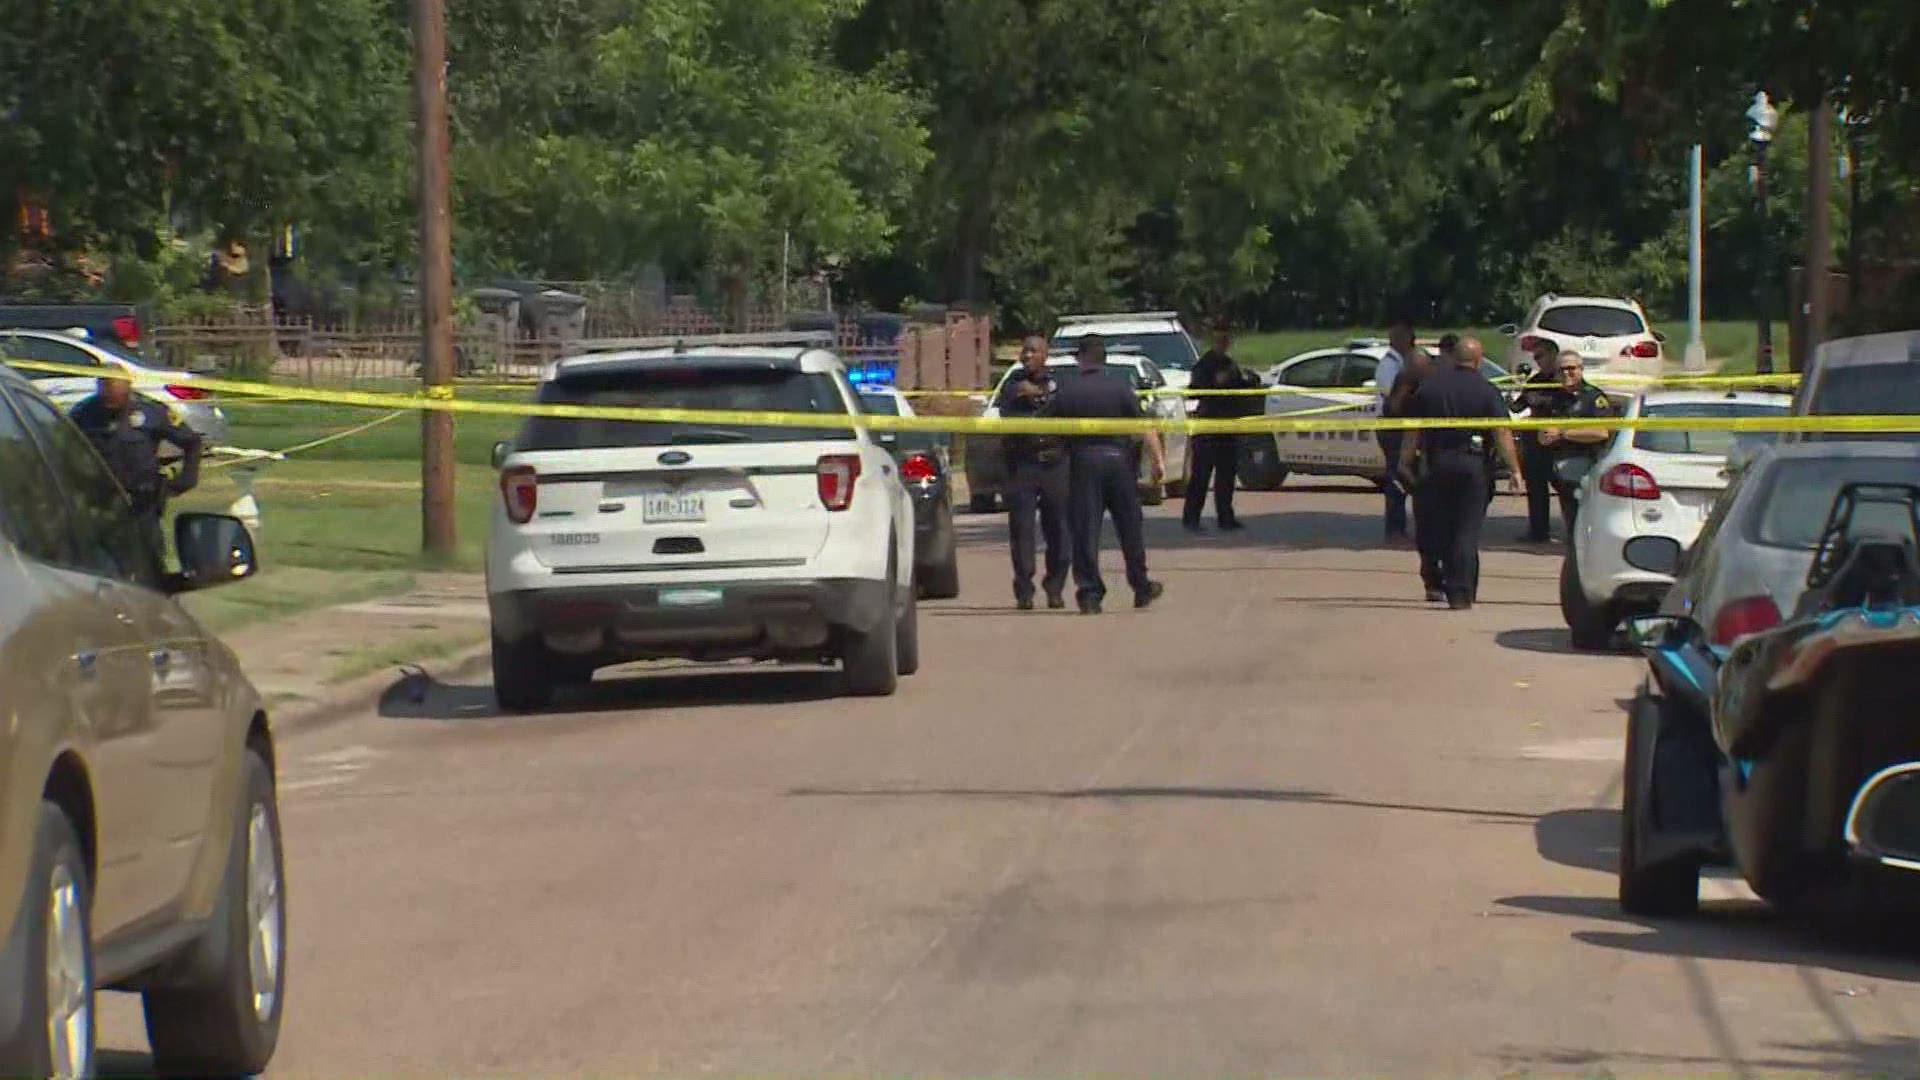 Here's what WFAA knows right now about the stabbing.